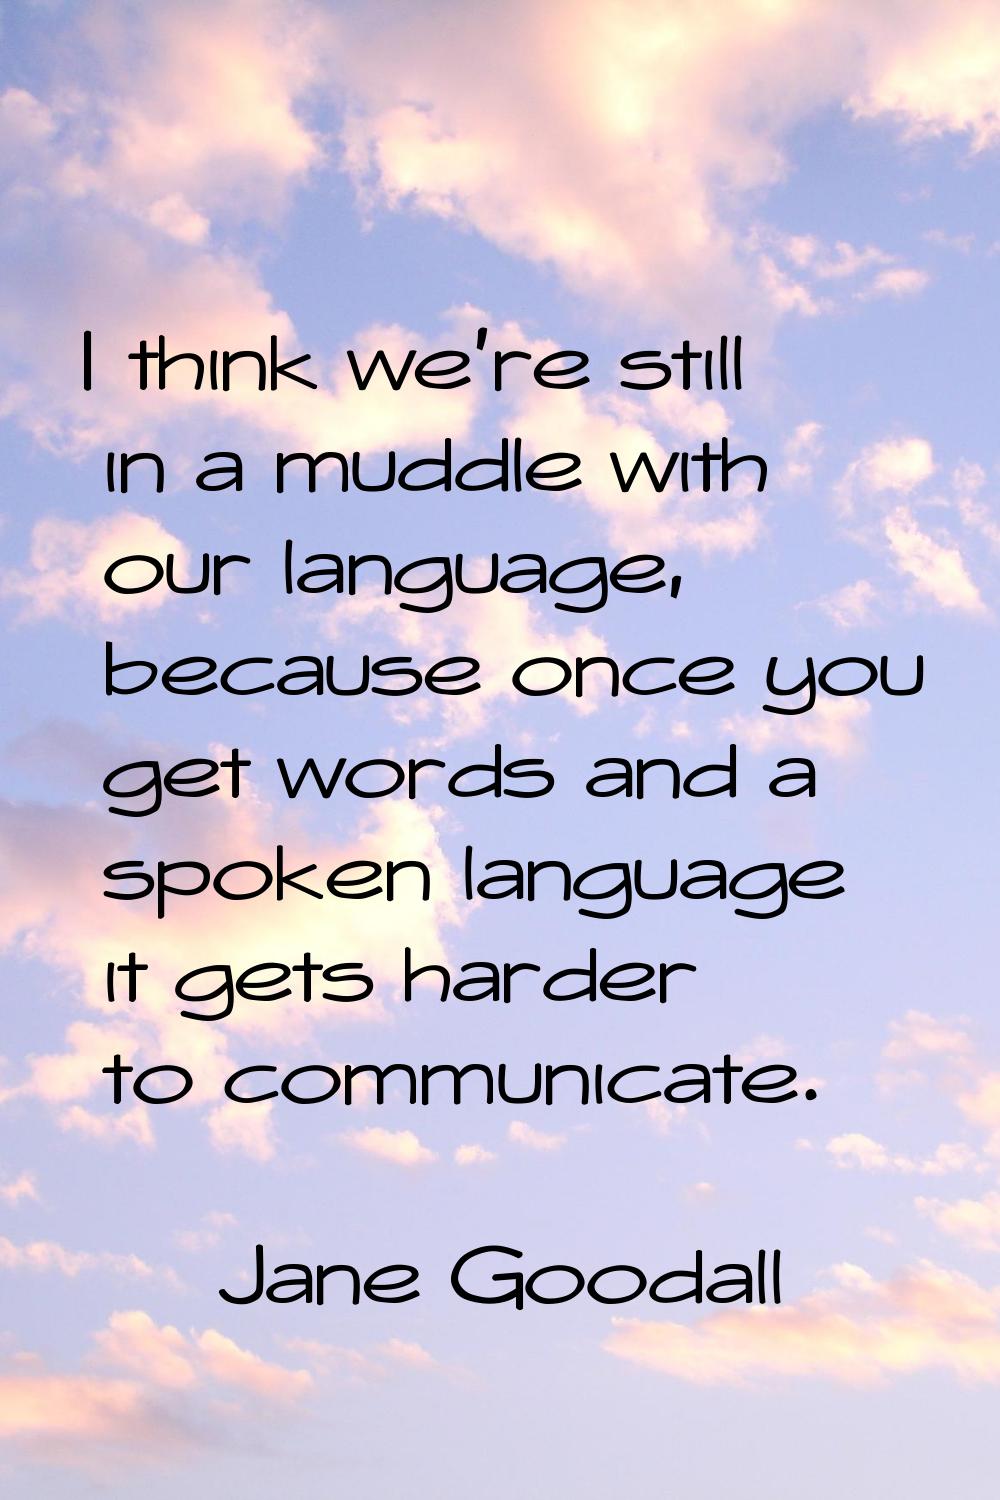 I think we're still in a muddle with our language, because once you get words and a spoken language